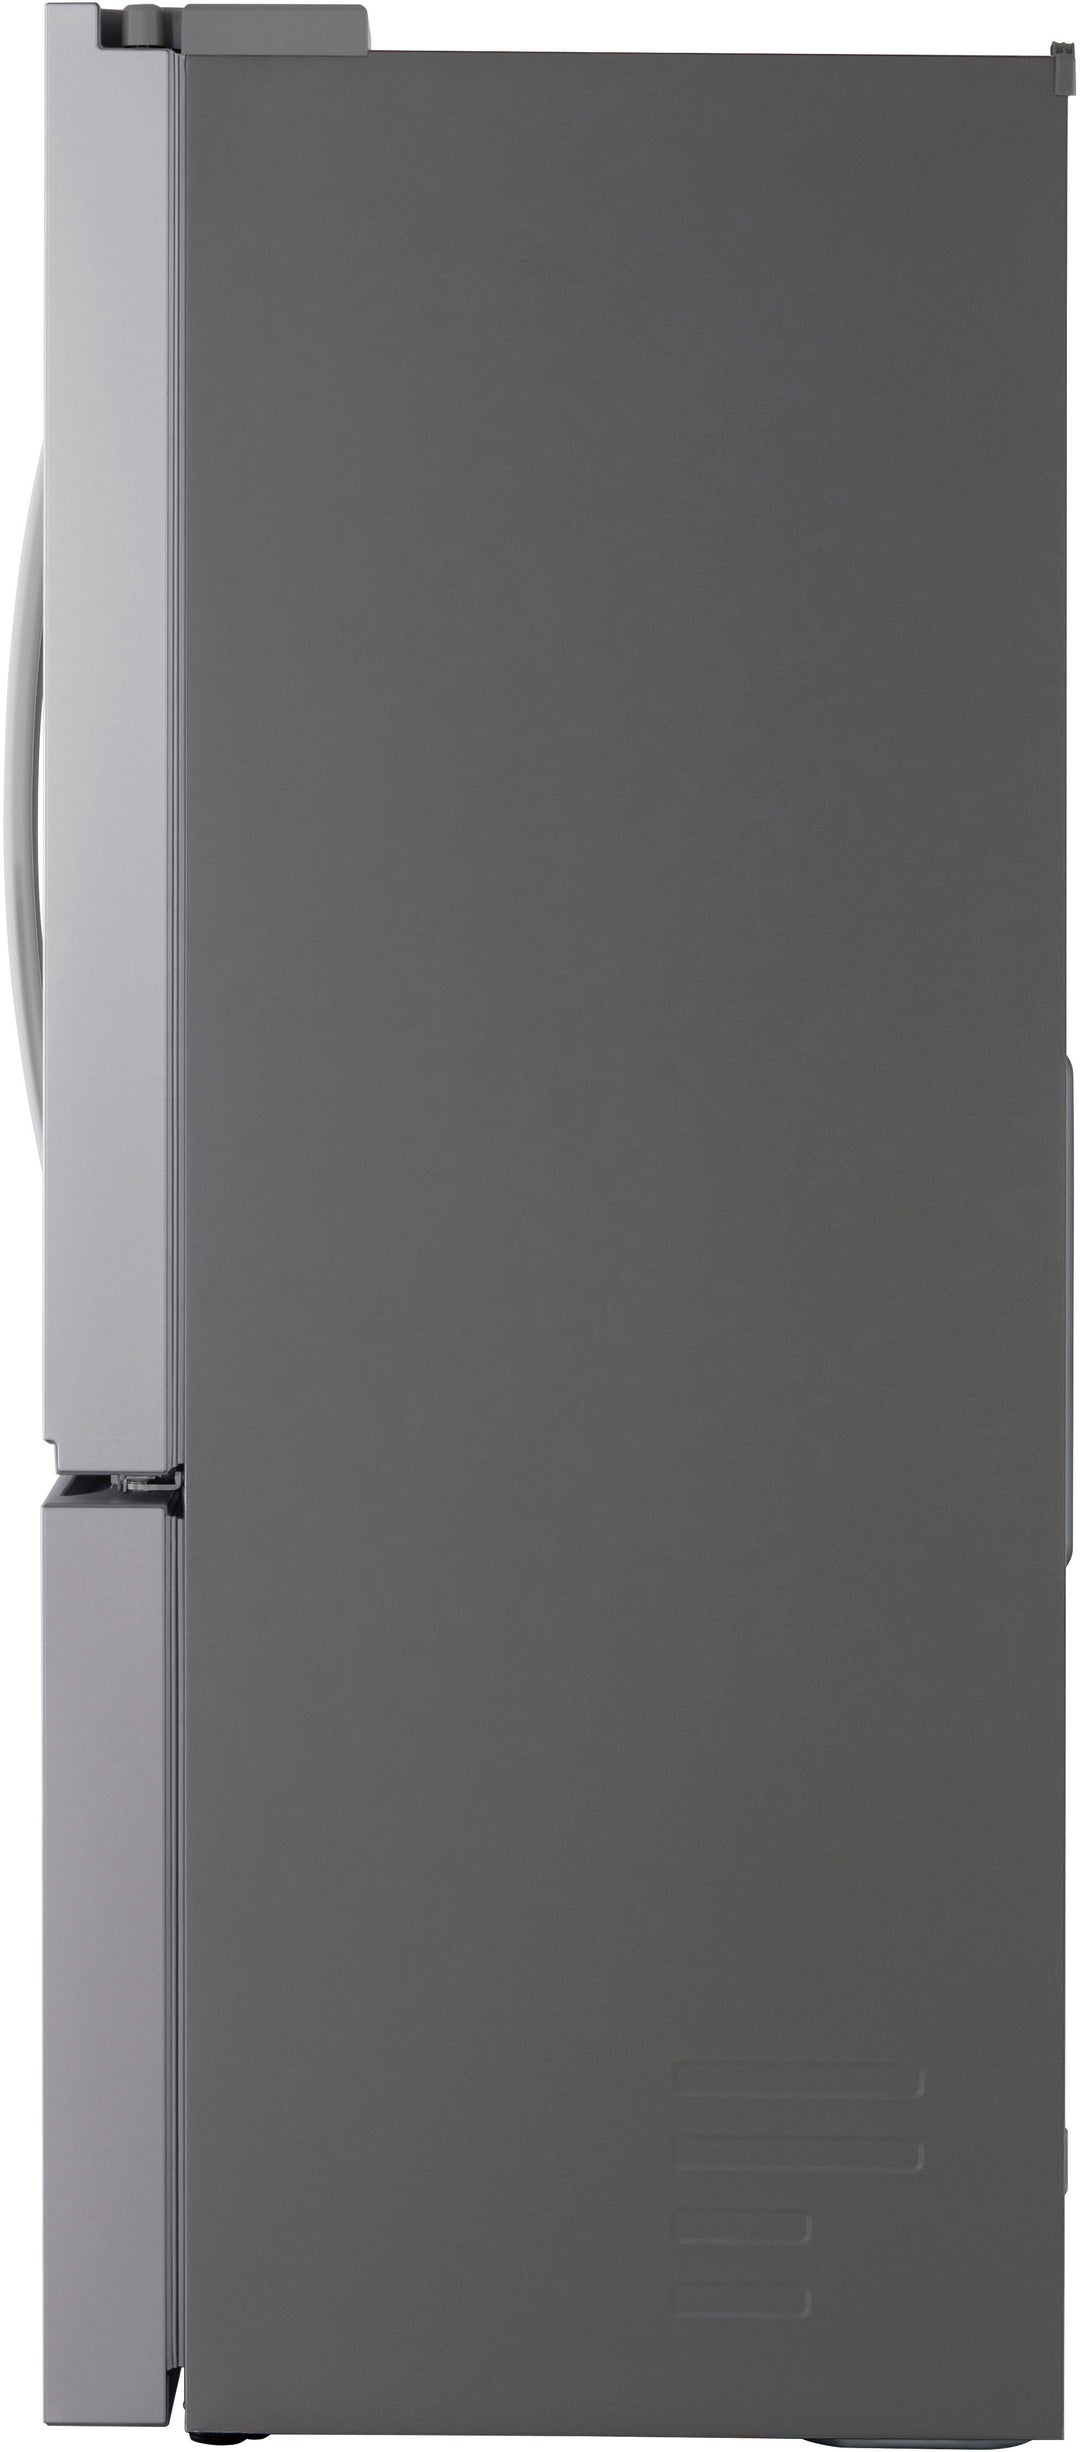 LG - 21 Cu. Ft. French Door Counter-Depth Smart Refrigerator with Ice - Stainless Steel_10